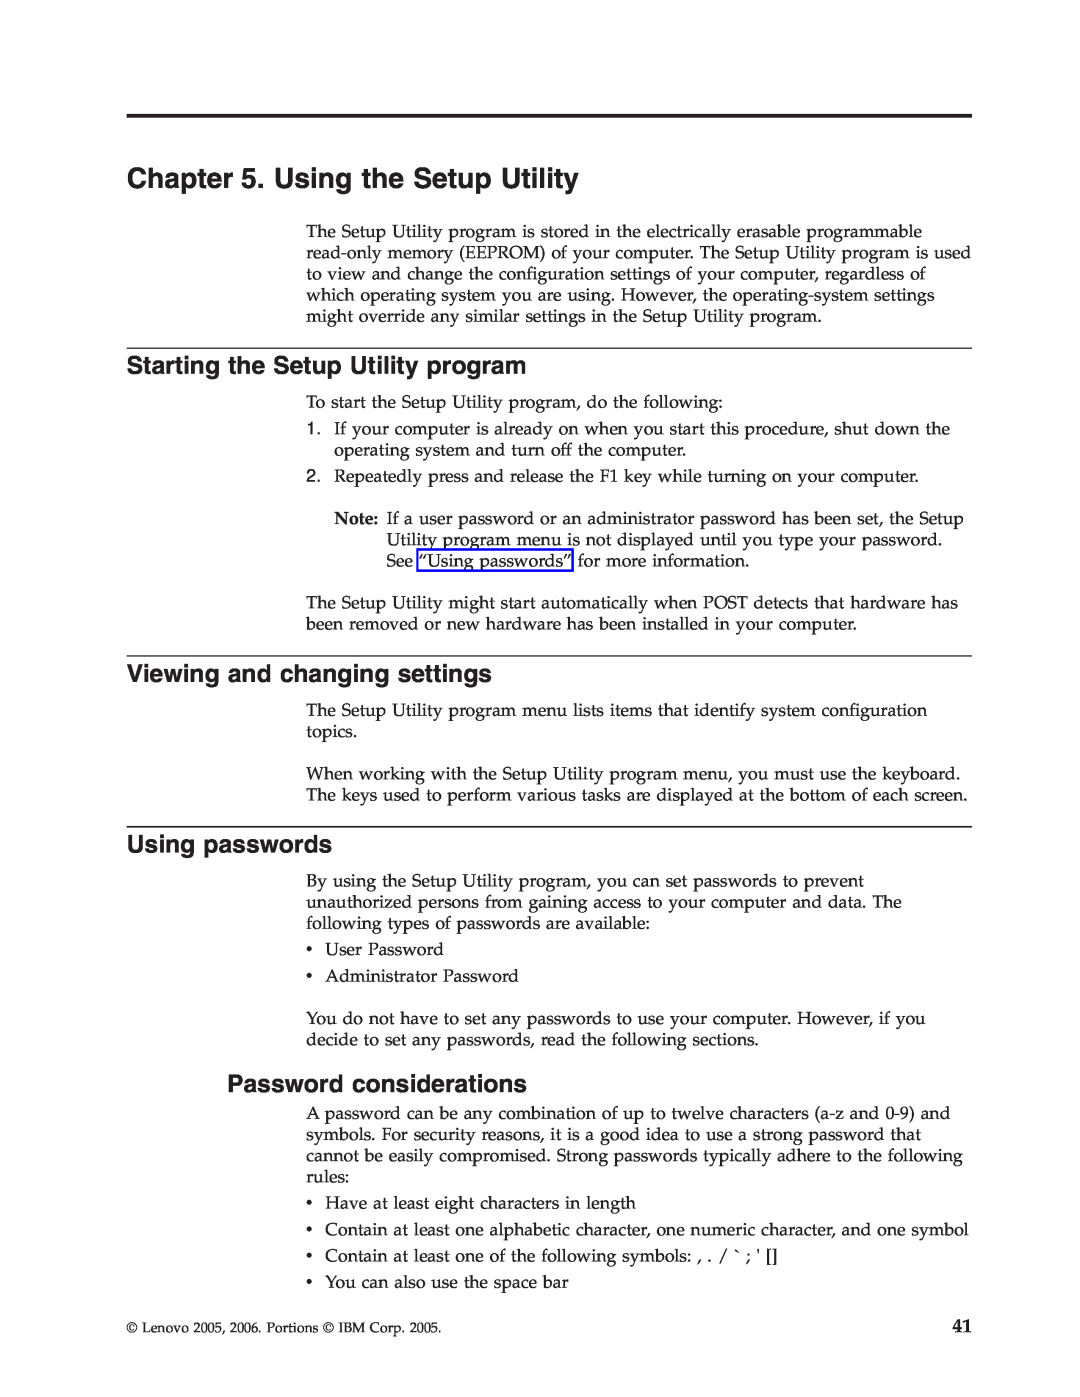 Lenovo 8795 Using the Setup Utility, Starting the Setup Utility program, Viewing and changing settings, Using passwords 